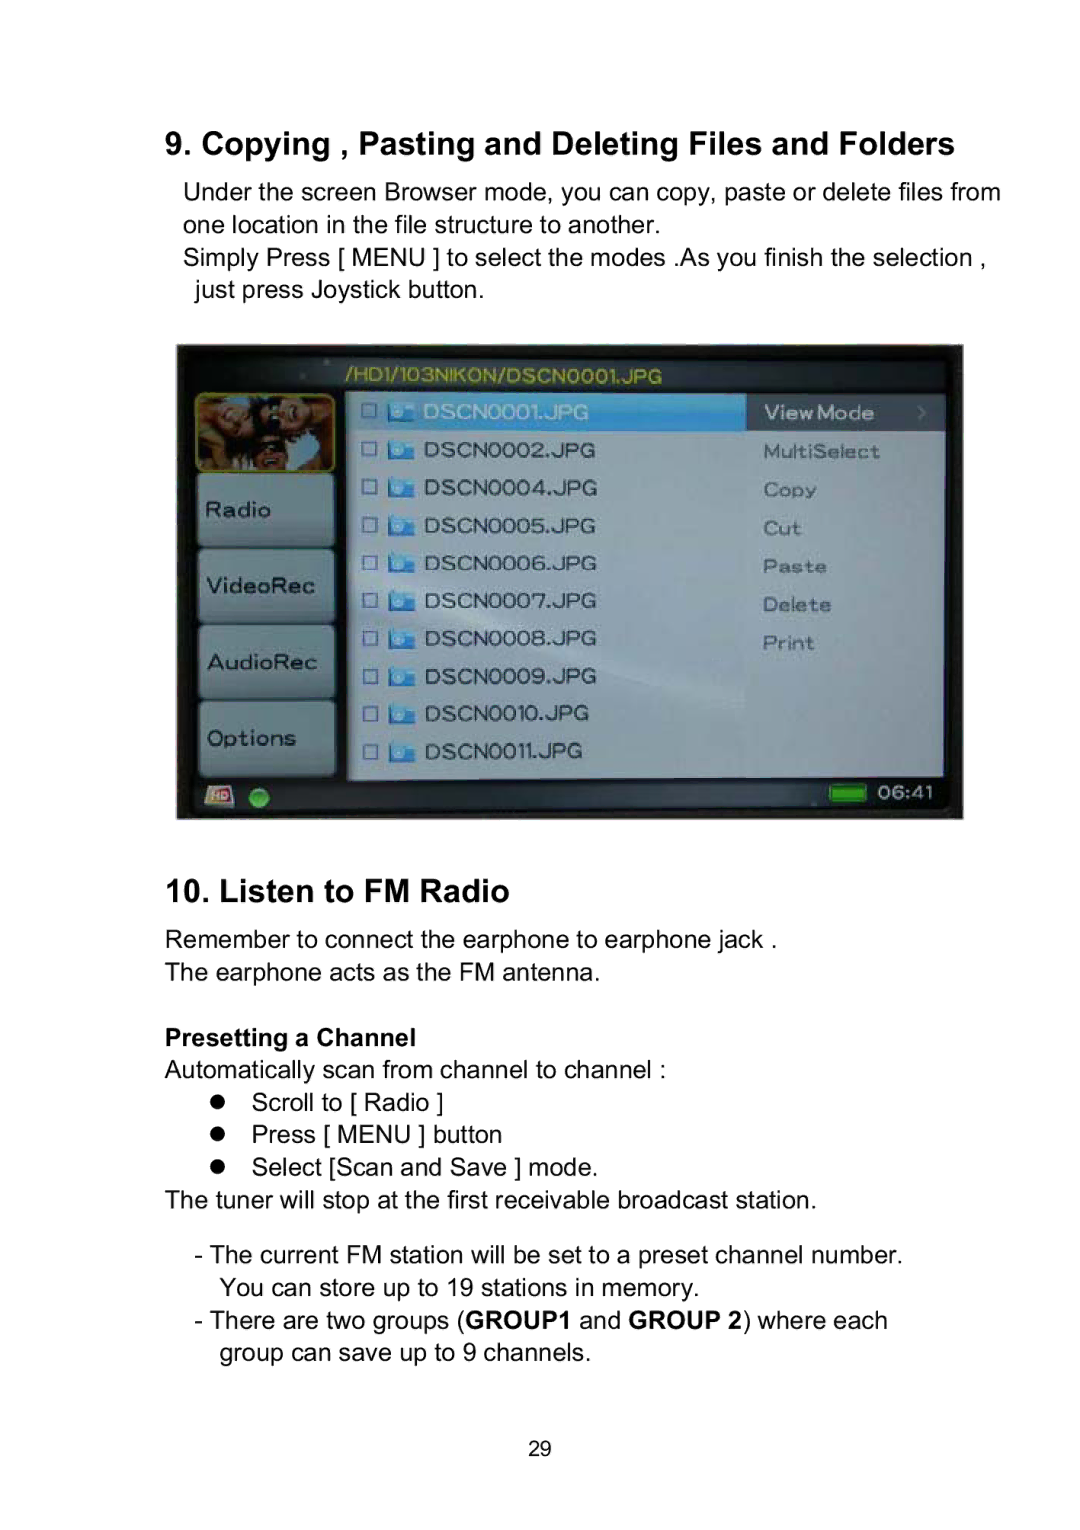 Vosonic VP8860 manual Copying , Pasting and Deleting Files and Folders, Listen to FM Radio, Presetting a Channel 